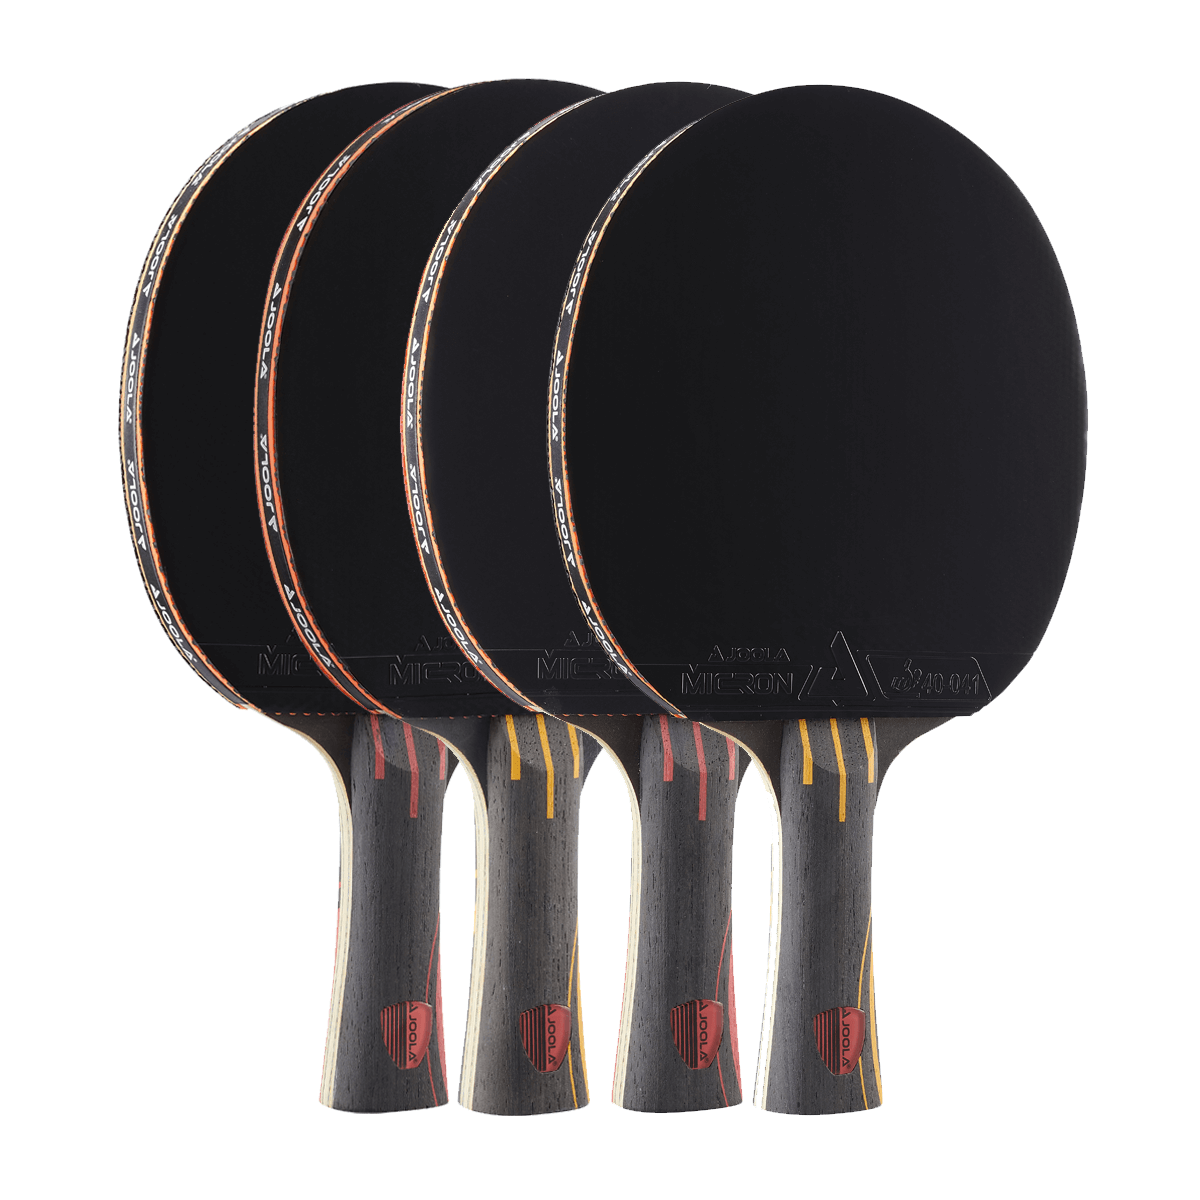 JOOLA INFINITY OVERDRIVE Table Tennis Racket with MICRON 48 Rubber 